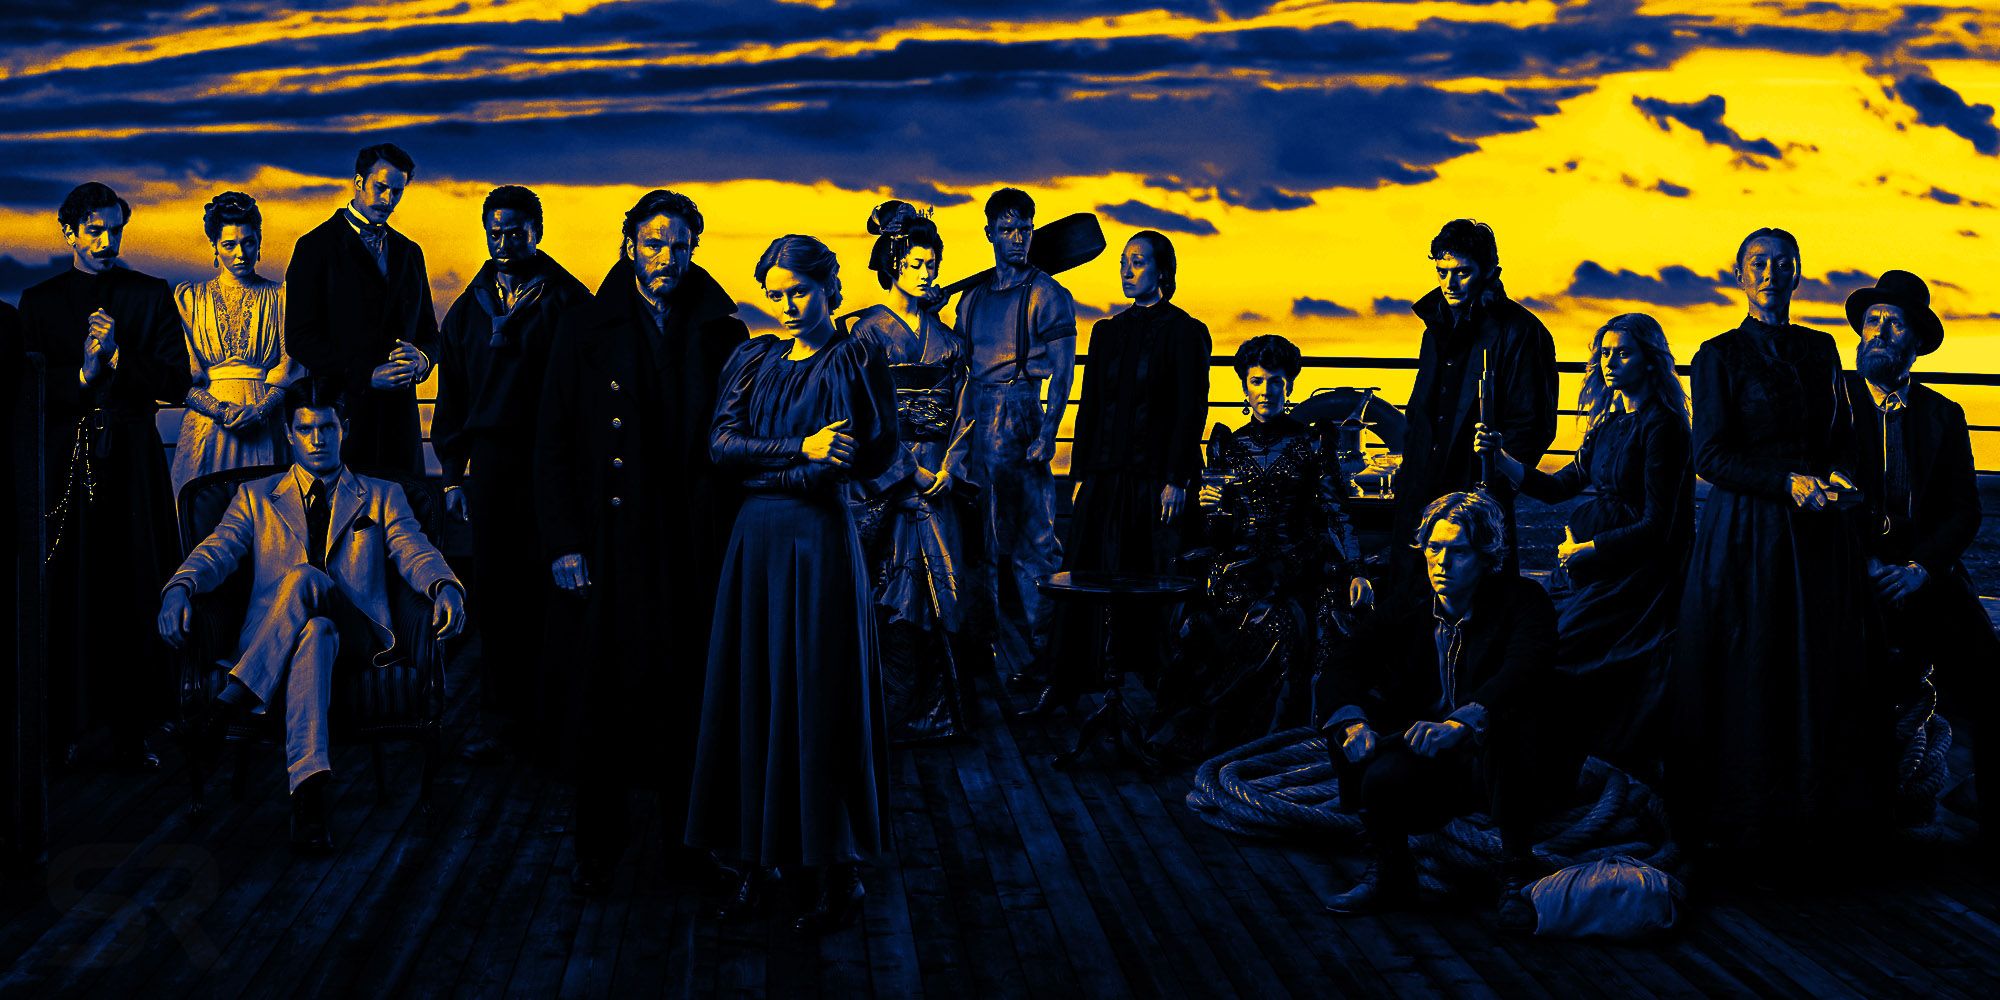 1899 Cast and characters